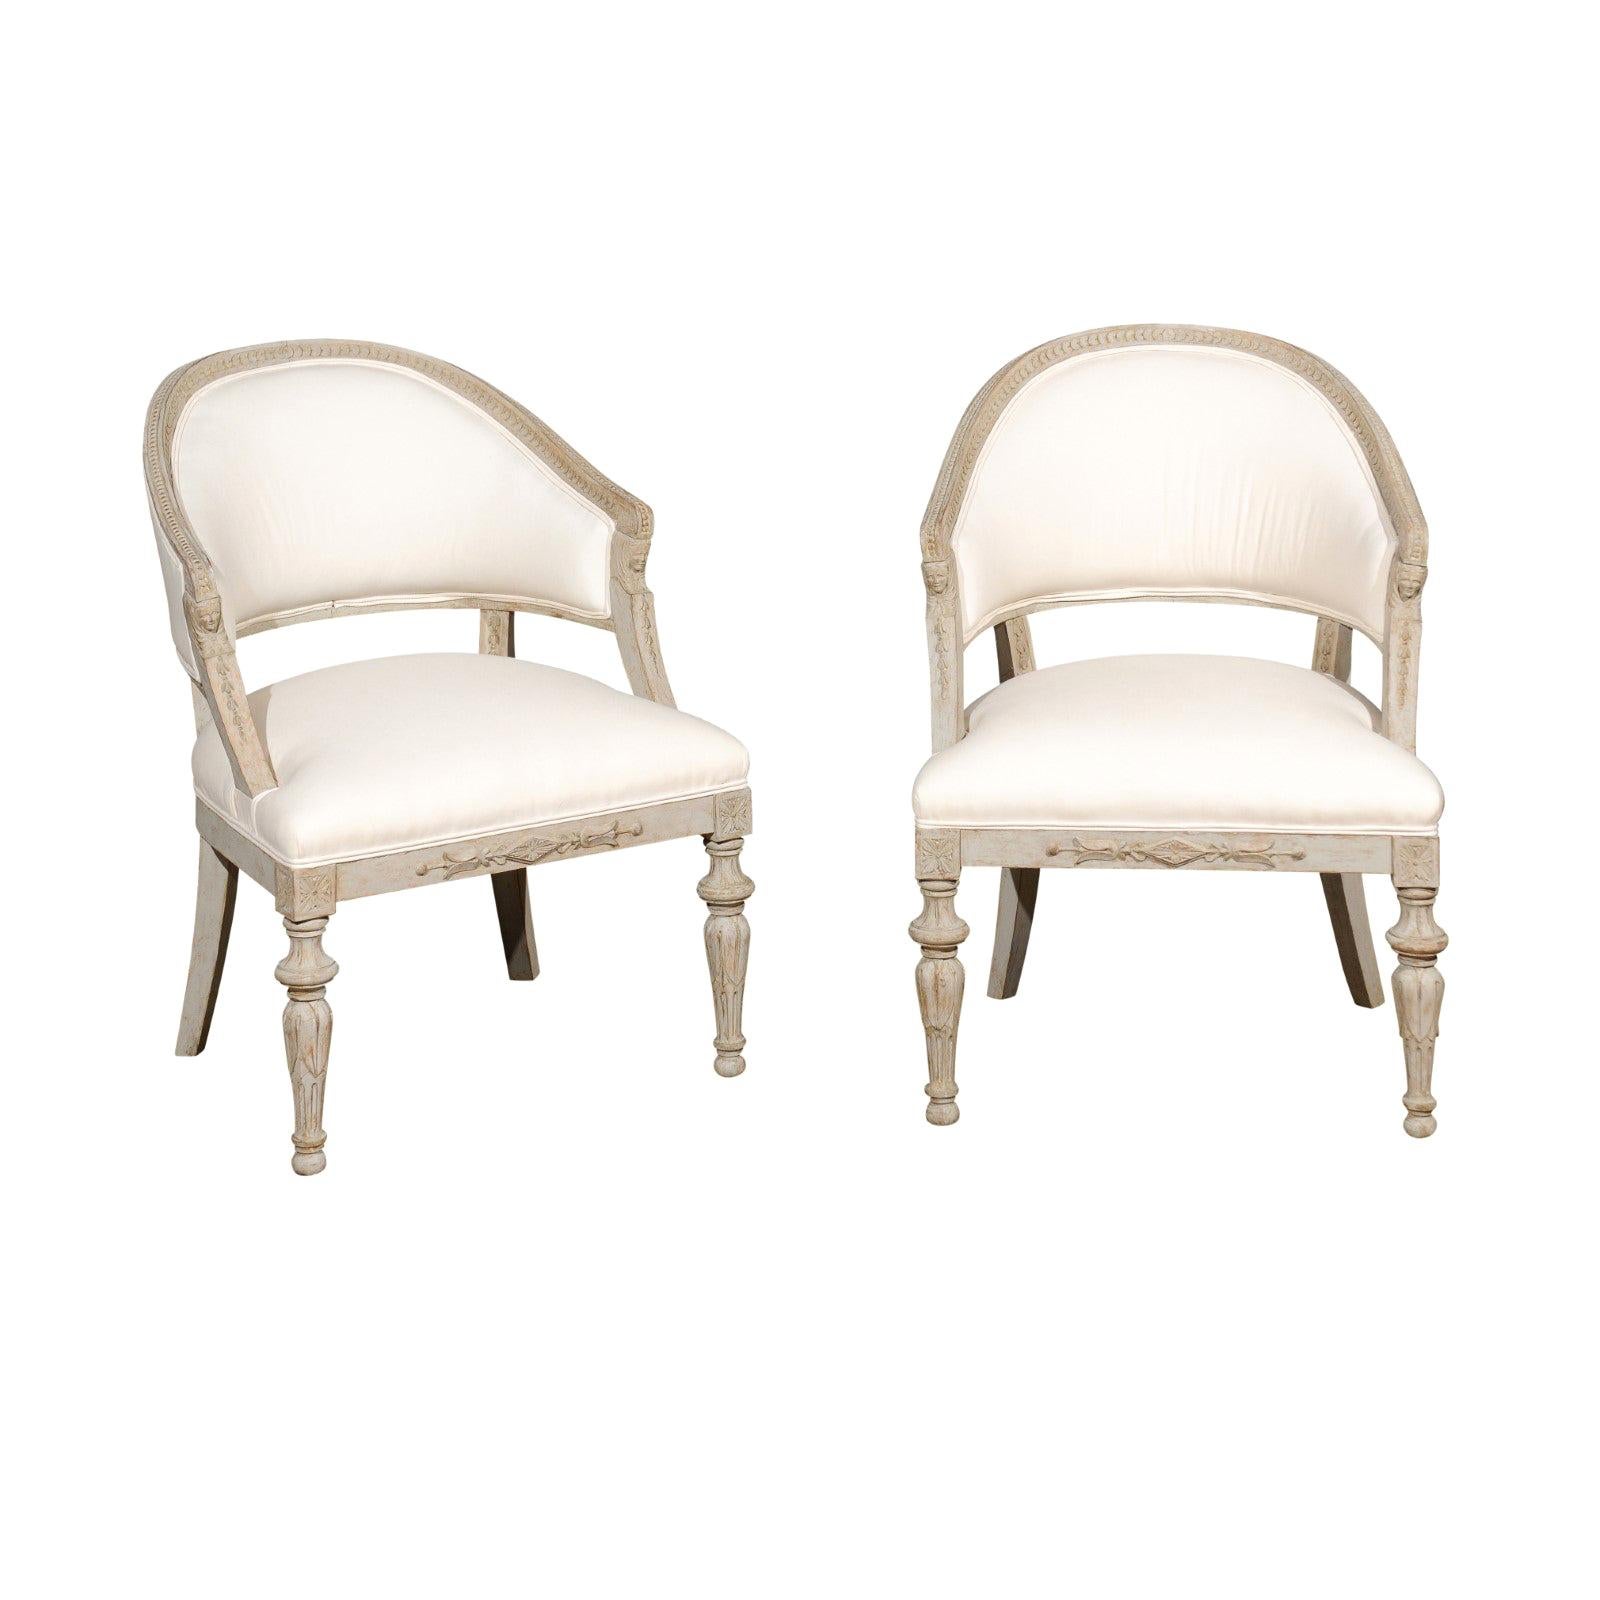 Pair of Swedish Neoclassical Style 19th Century Barrel-Back Upholstered Chairs